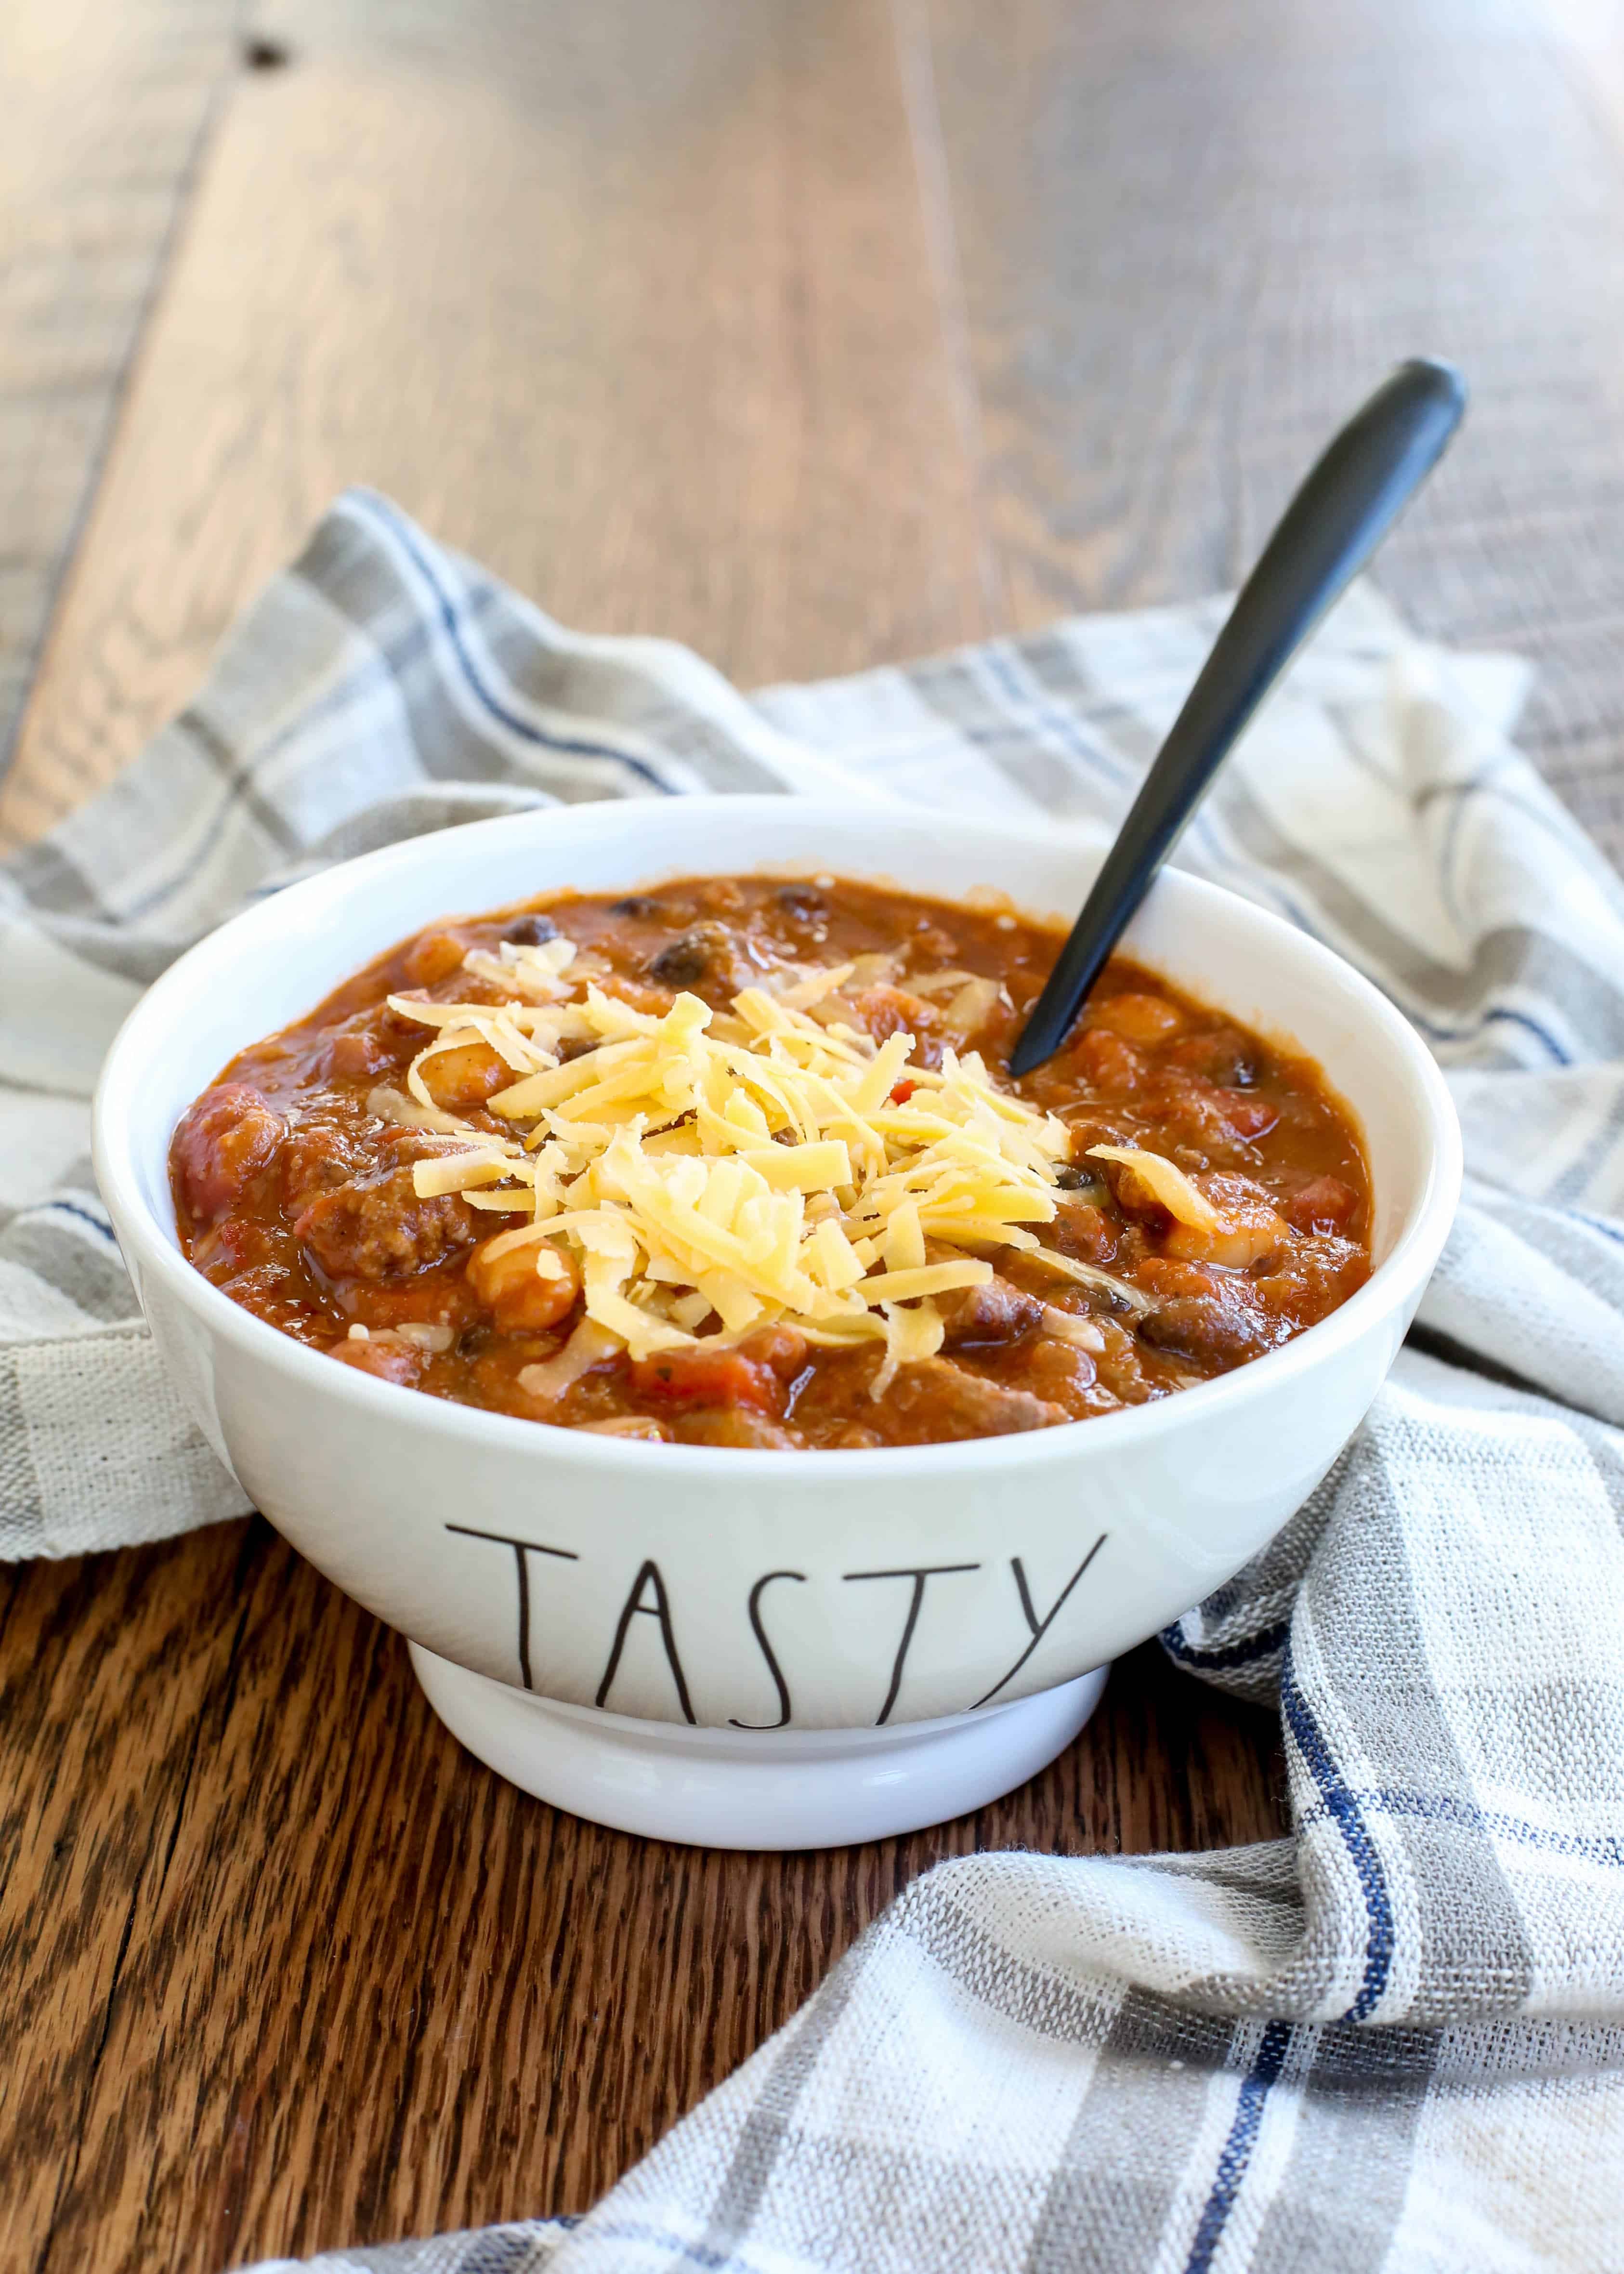 Spicy Five Bean Chili With Steak And Sausage